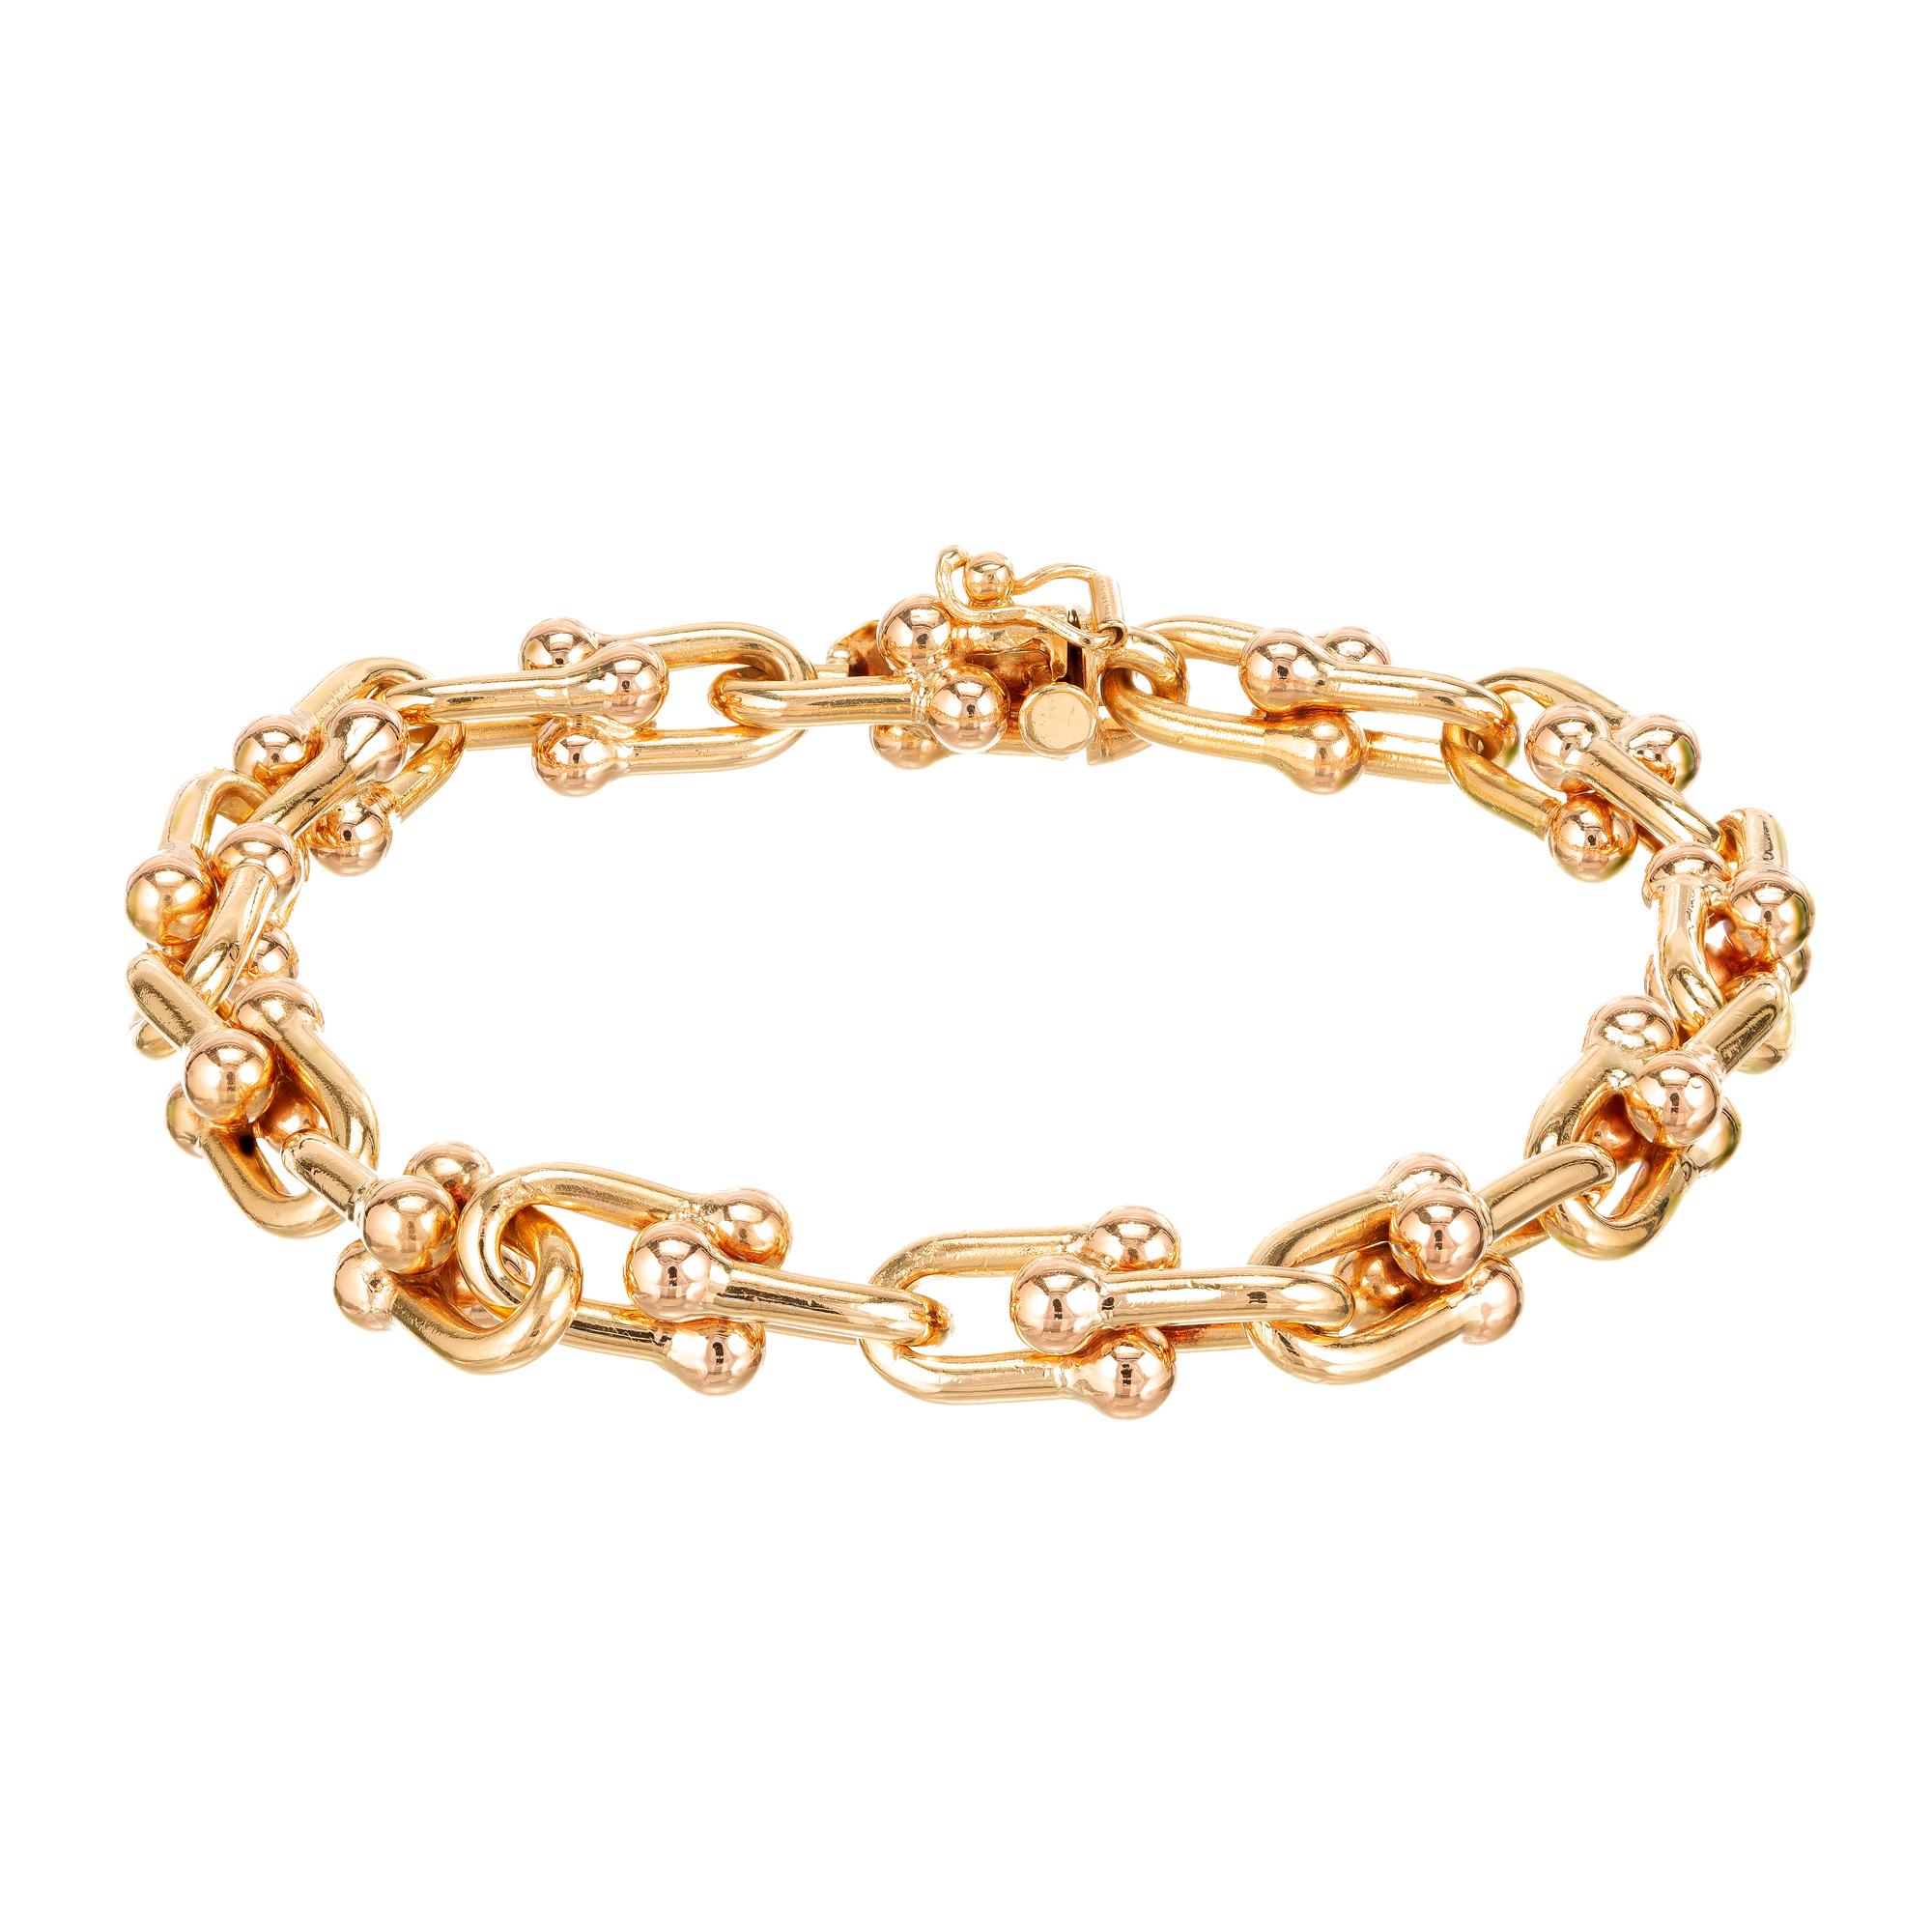 Vintage 1940-1950 solid 18k Rose Gold and Yellow Gold stirrup link Italian bracelet with hidden box catch 

Width: 7.93mm or .31 Inches
Bracelet/ Chain: 6.75 Inches
Depth or Thickness: 7.93mm
37.1 grams 
18k Yellow Gold 
18k Rose Gold
Stamped: